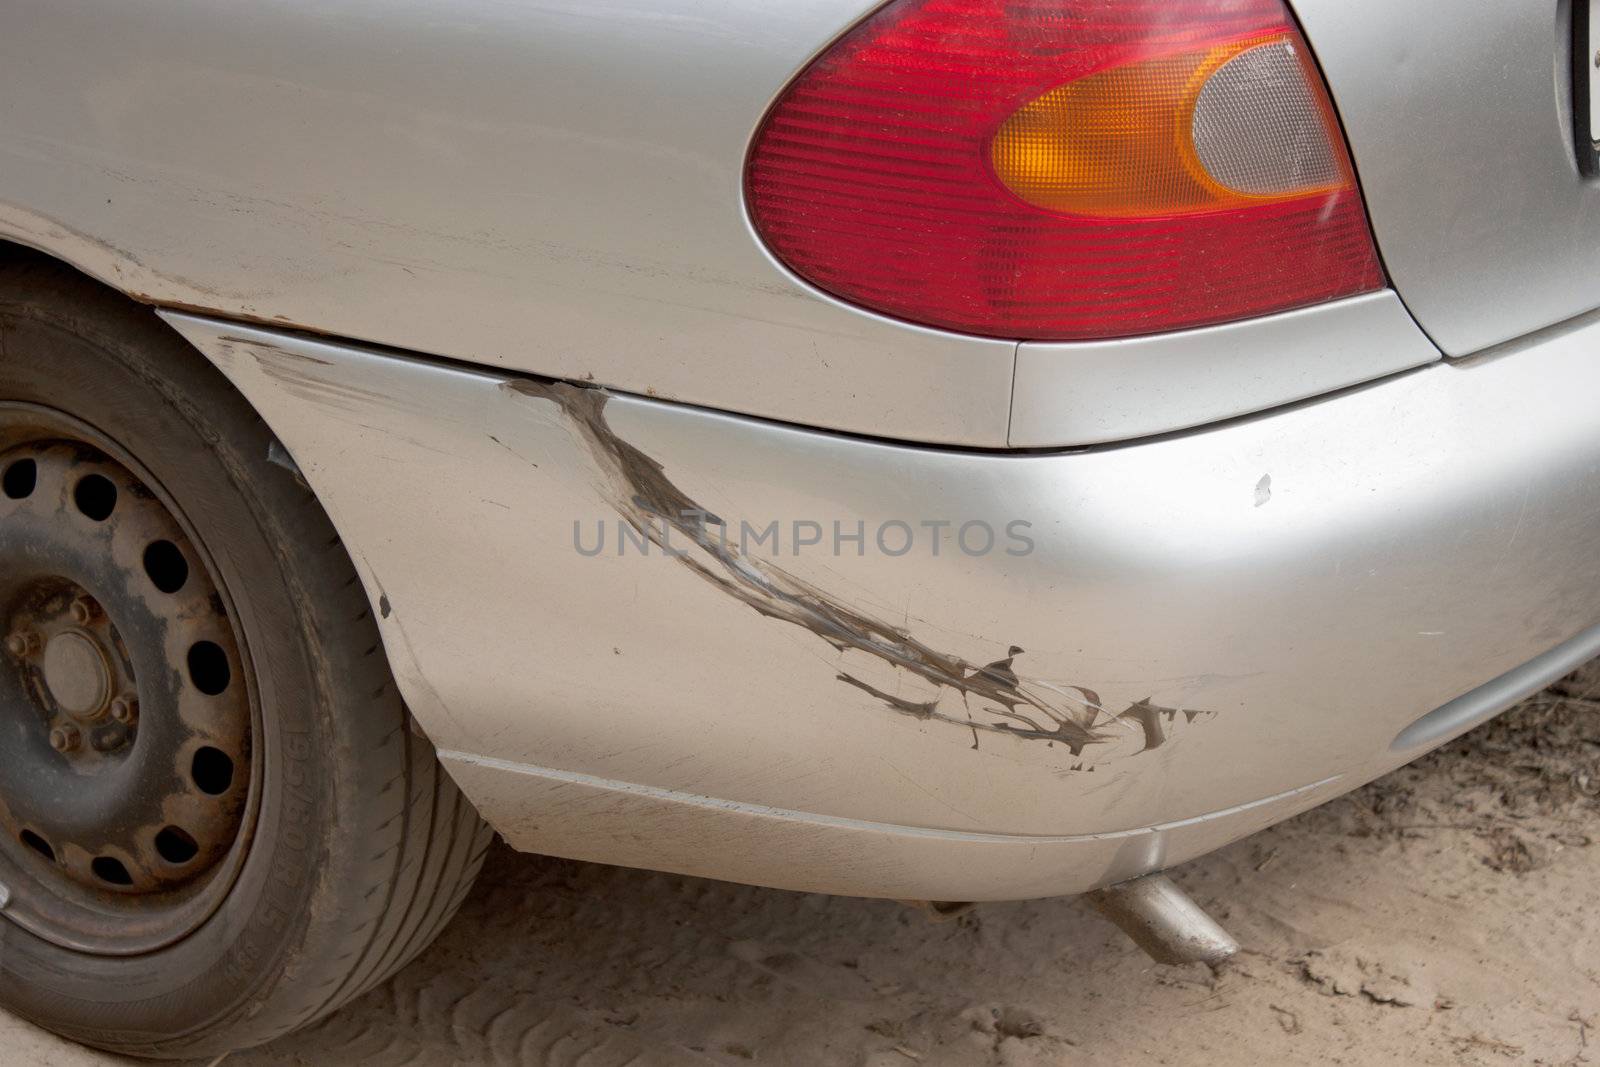 Damage to the bumper of the car